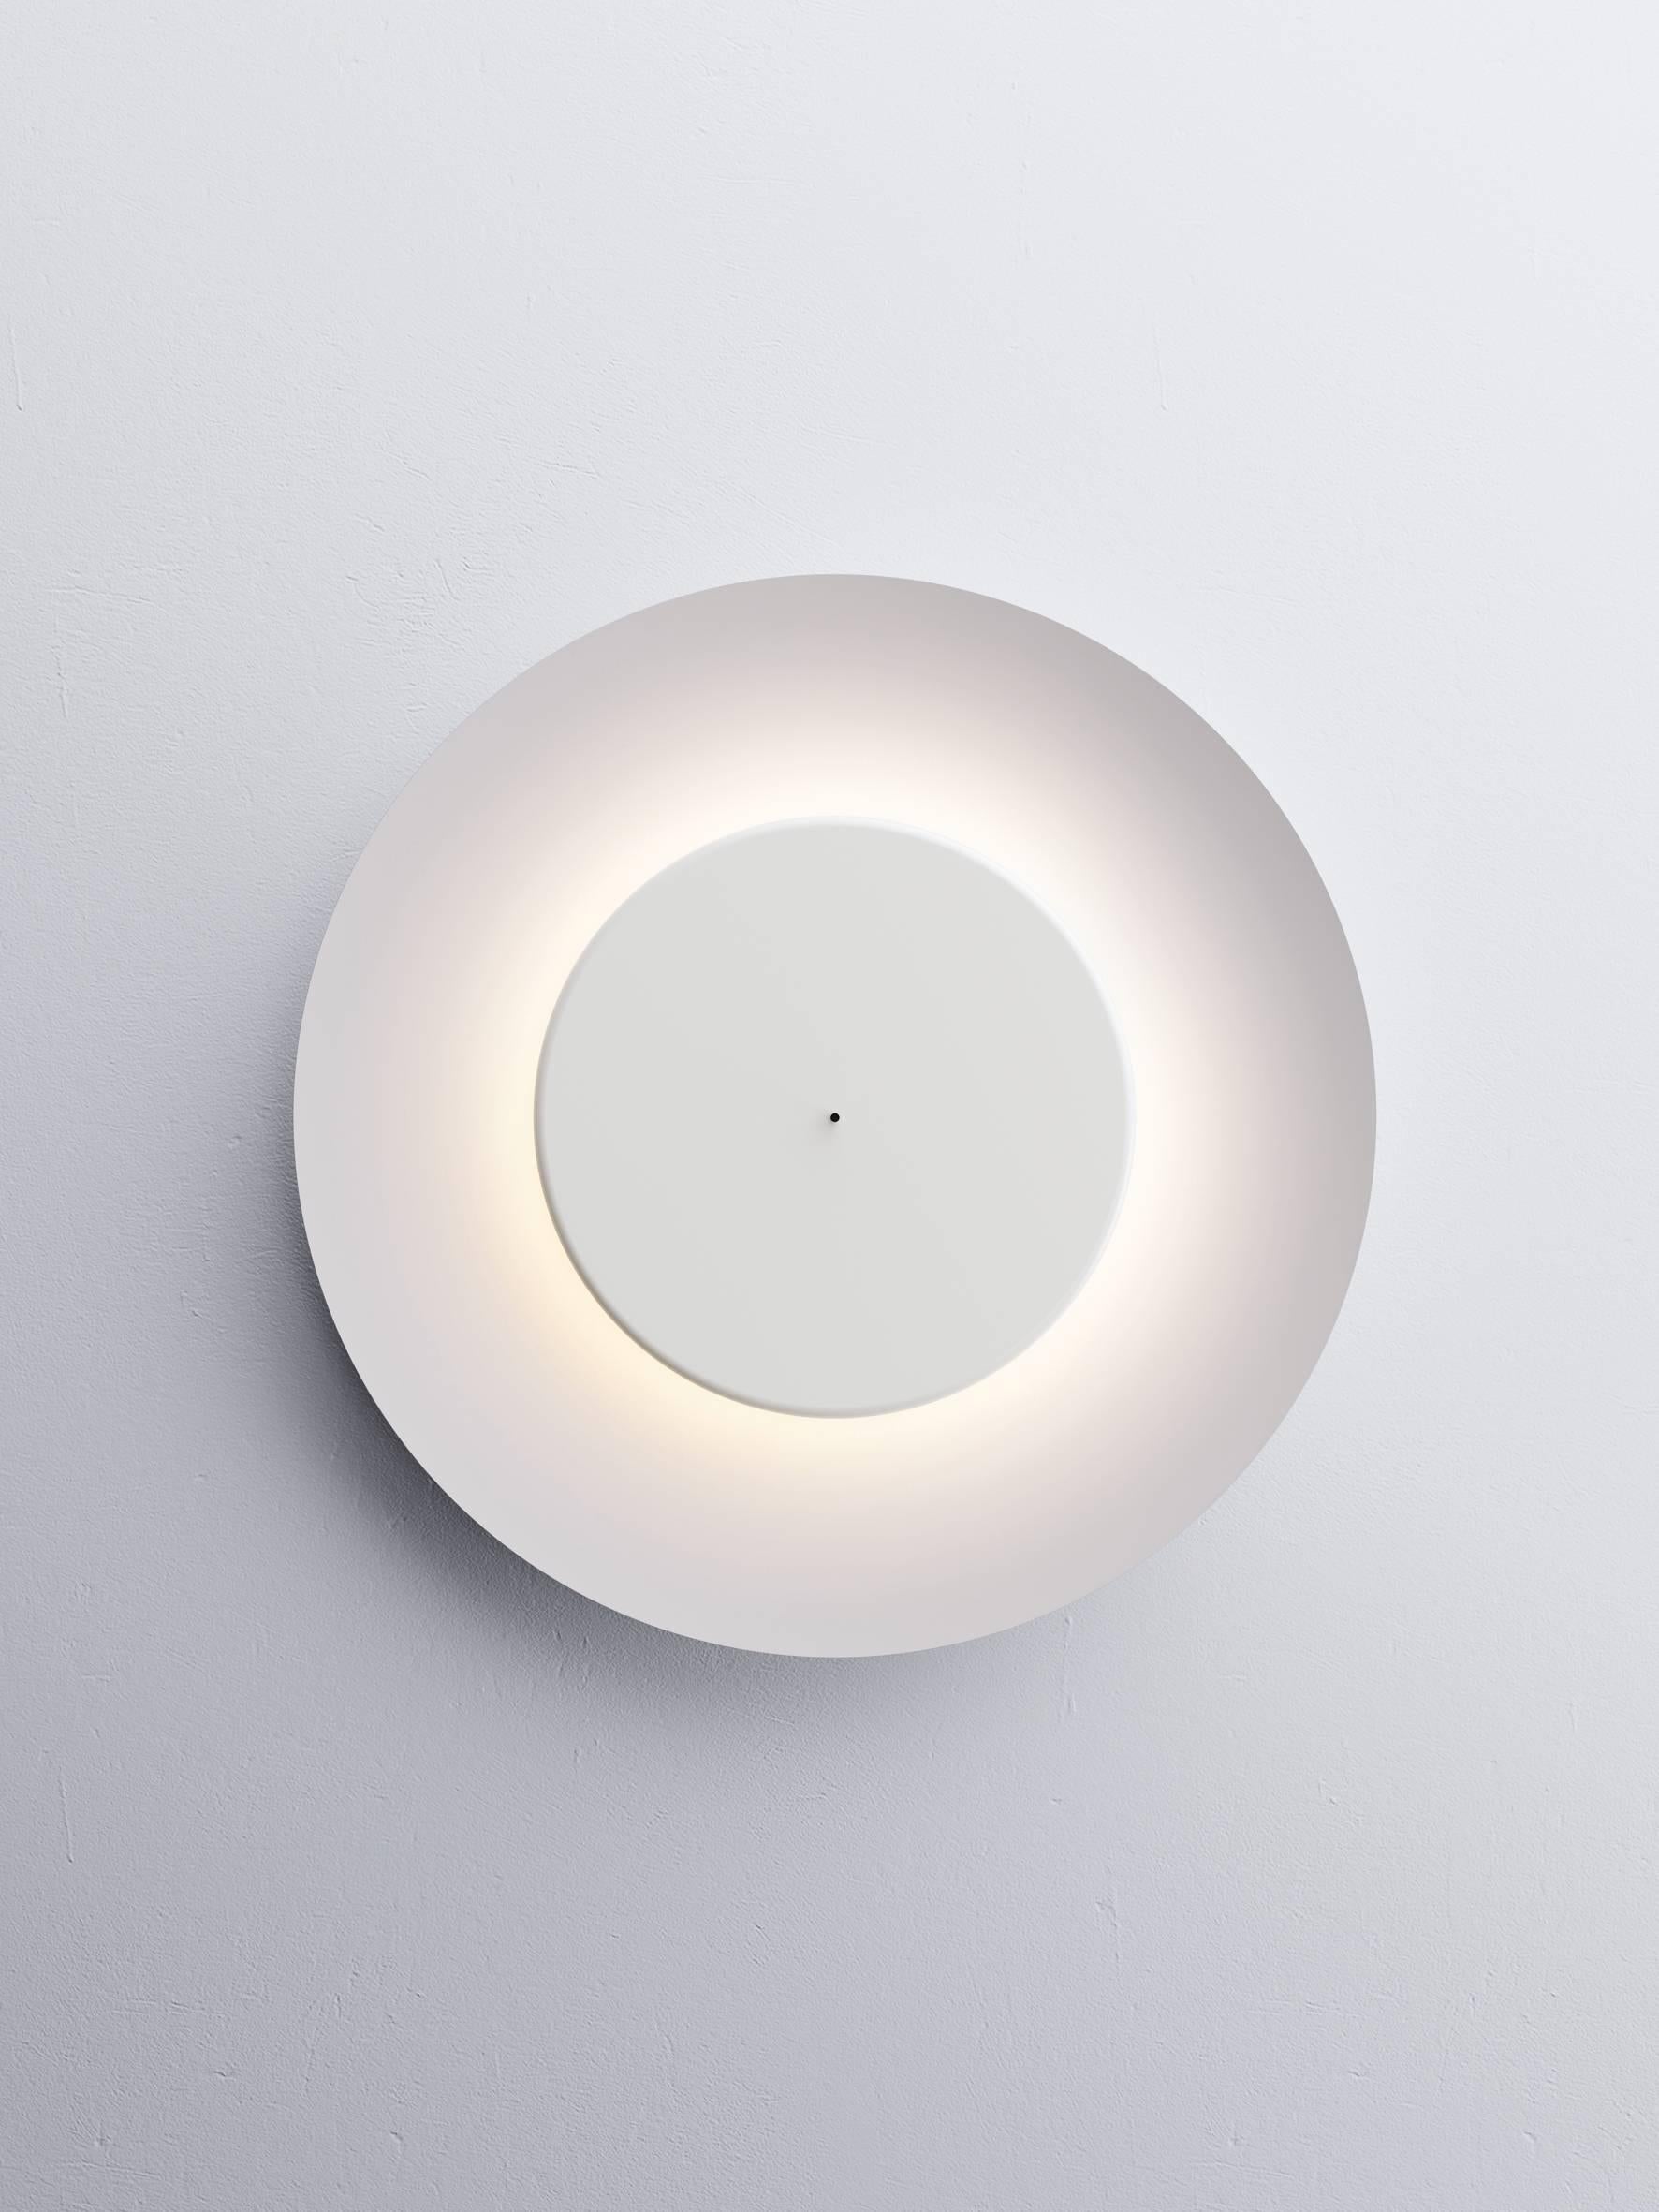 A wall and ceiling lamp with a surprising light effect, reminiscent of the phenomenon produced by eclipses. The light produced depends on the position of the smaller front disc containing the light source with regard to the large concave aluminum